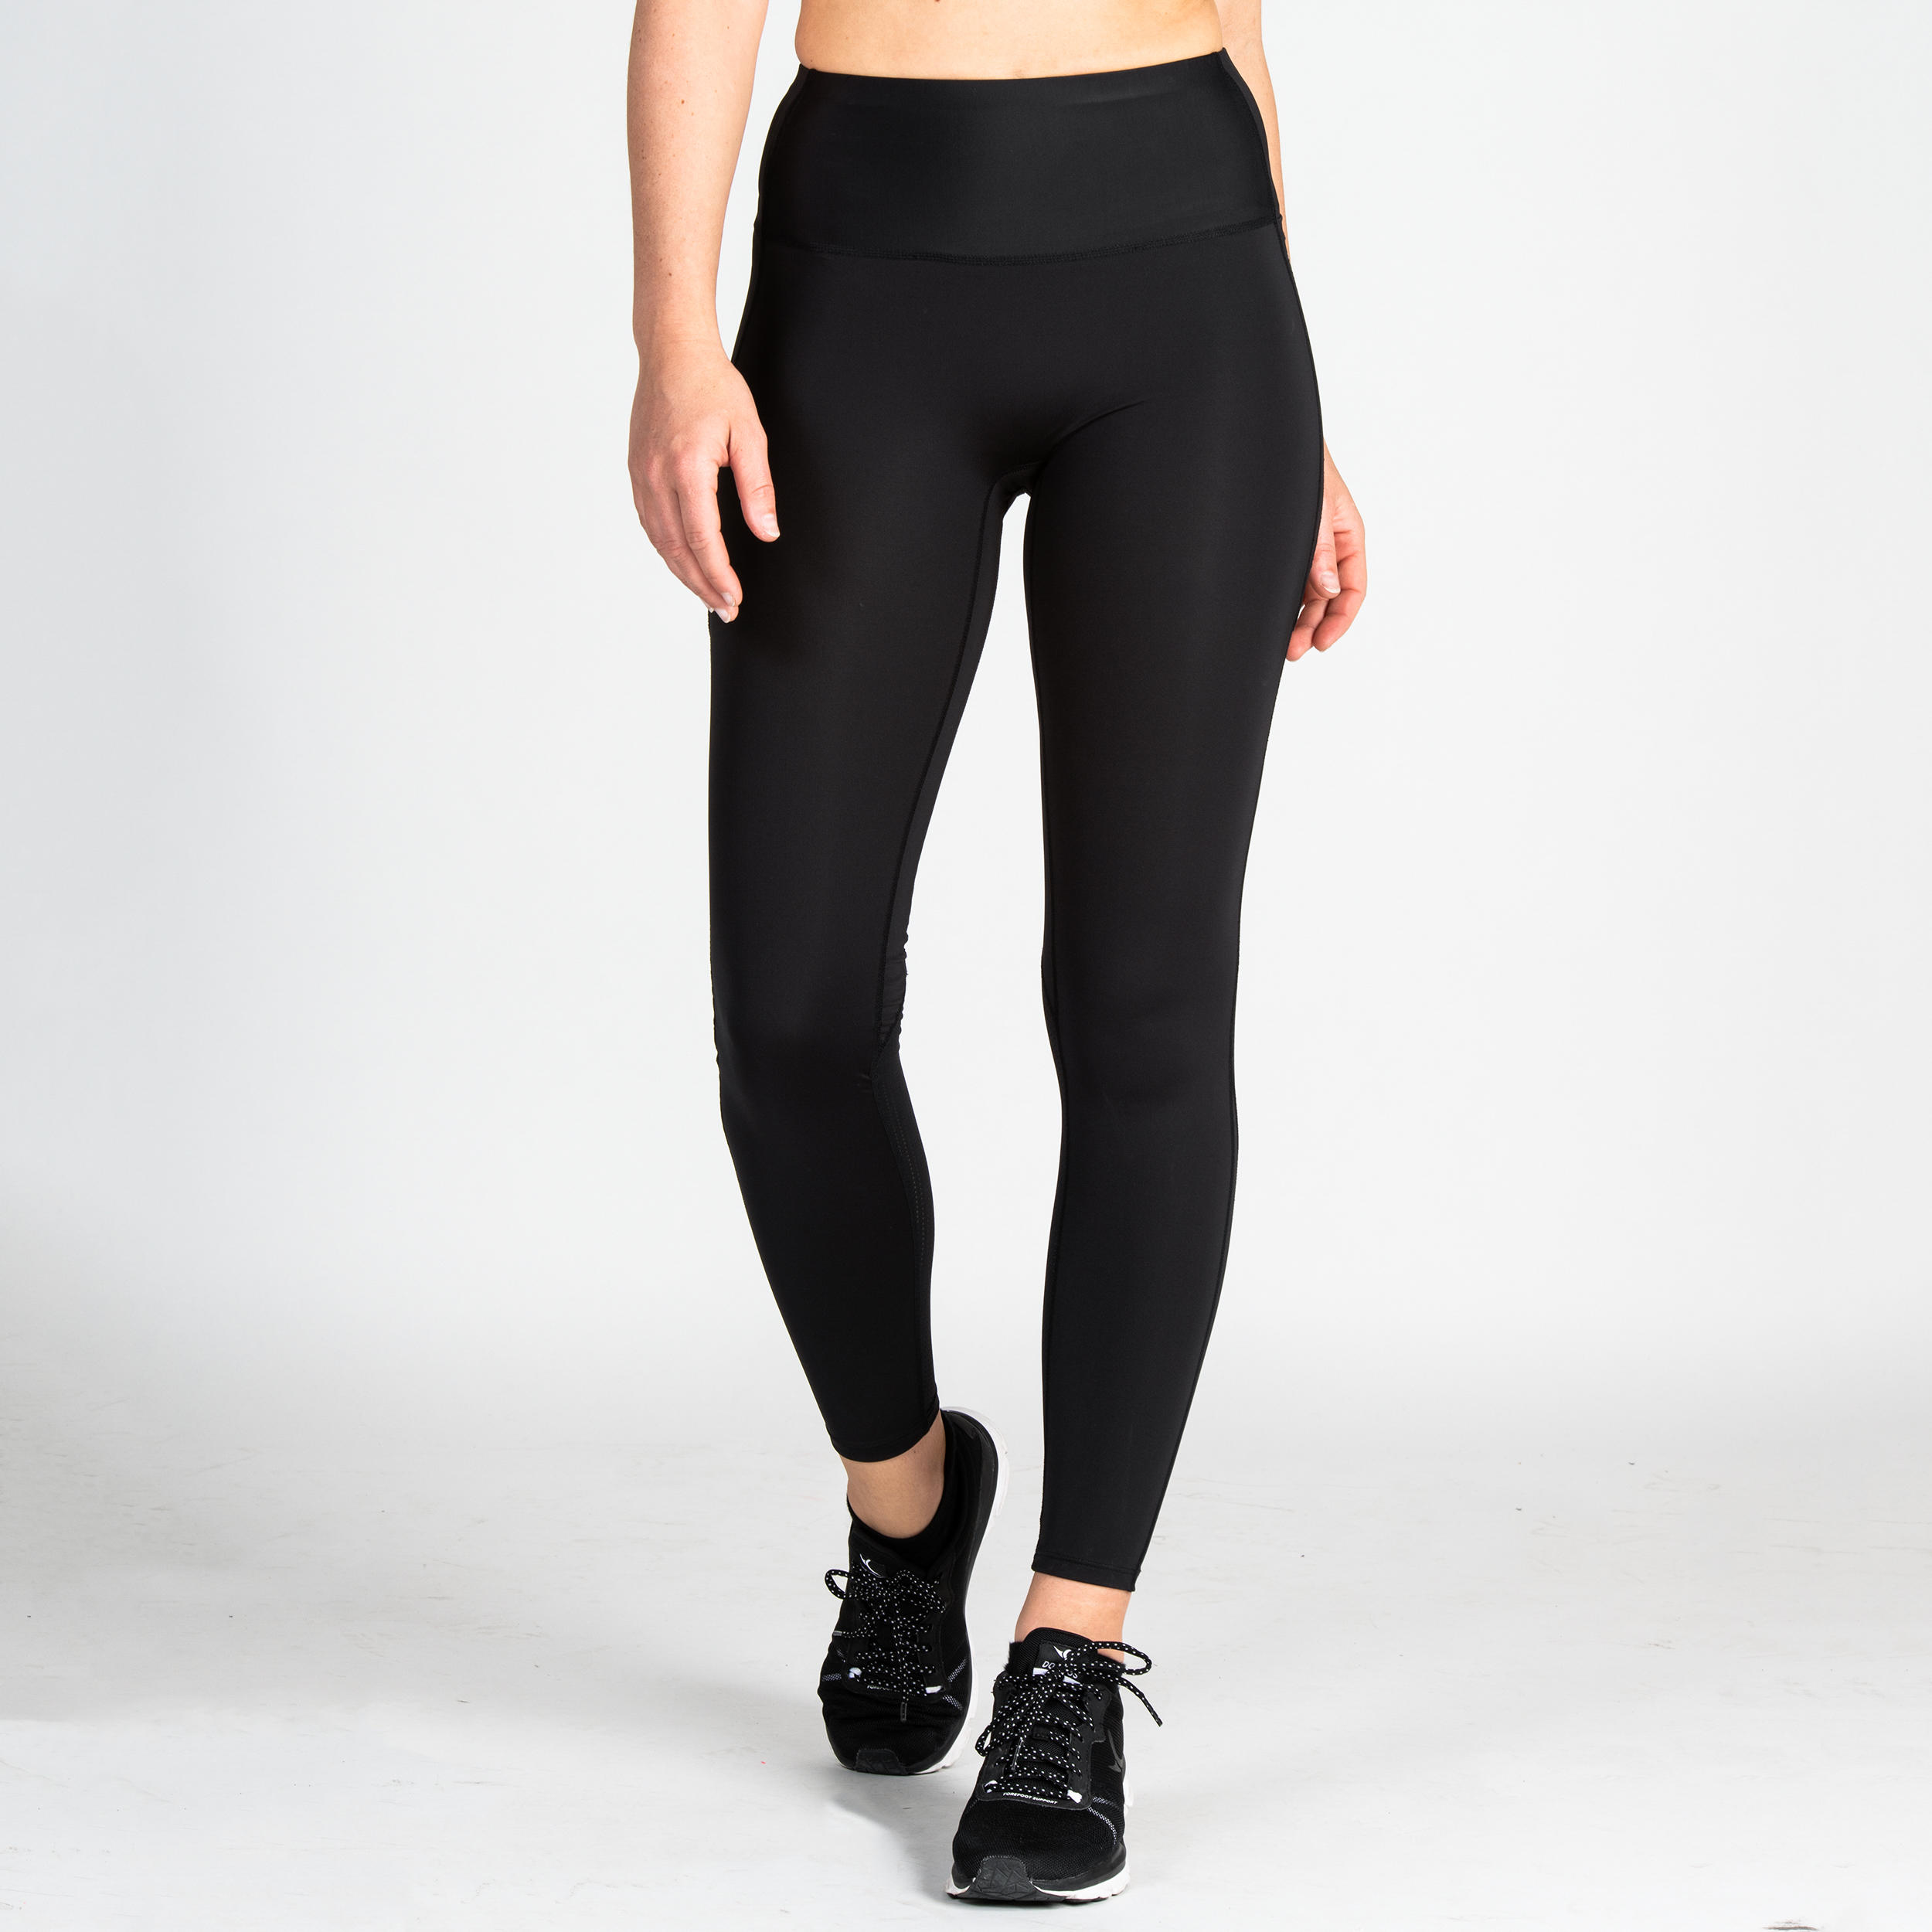 Gym Leggings - Buy Gym Tights & Gym Pants for Women Online | Zivame